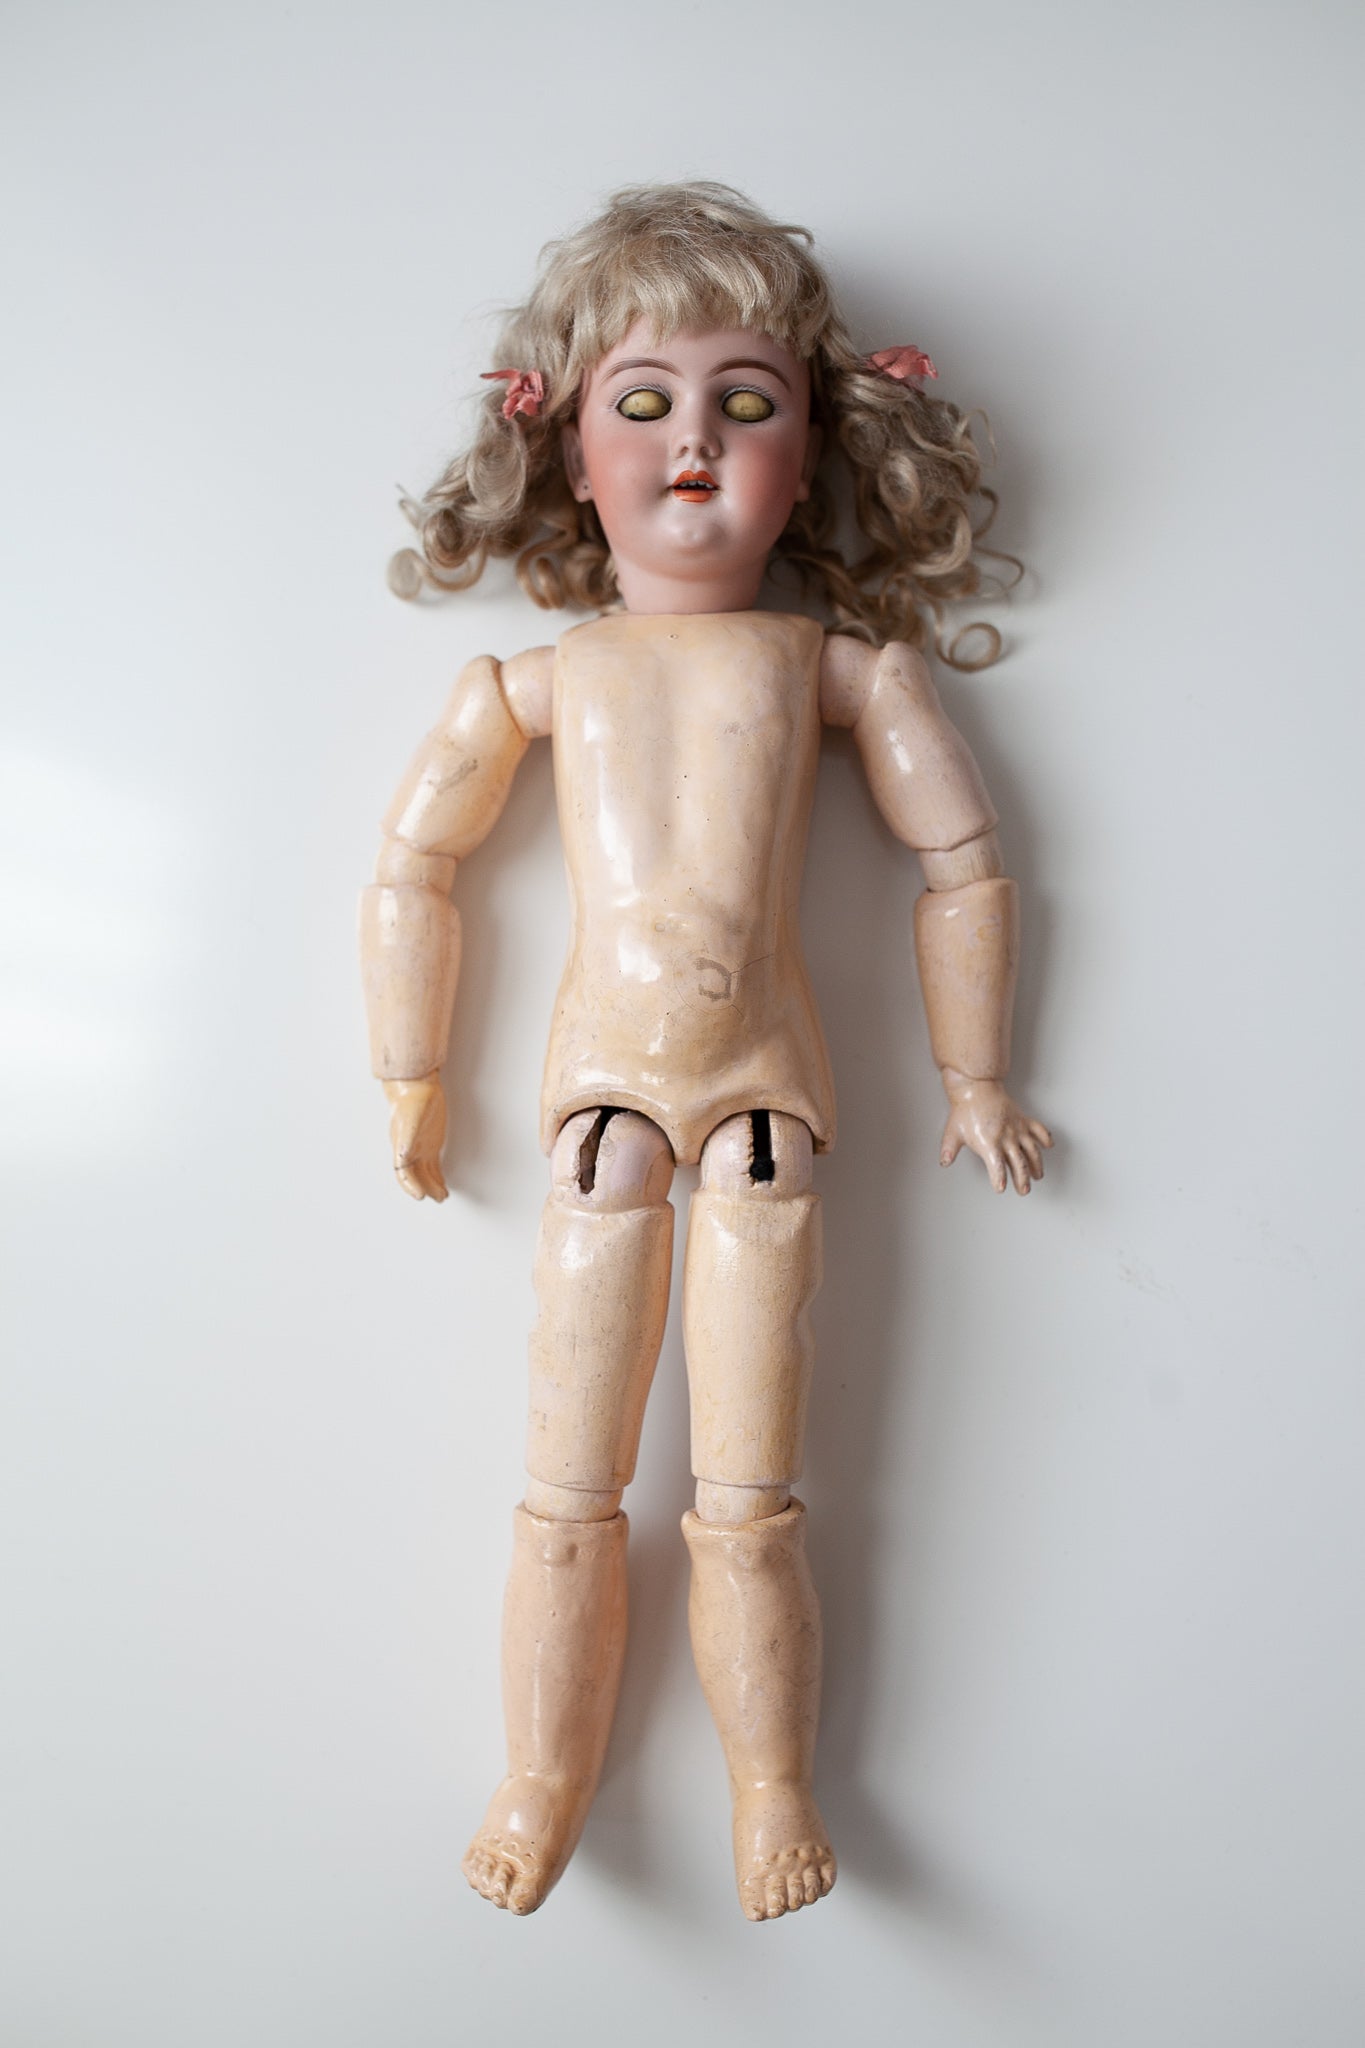 Antique Doll - Heinrich Handwerck German Doll- Composition Jointed Doll with Bisque Head and Sleepy Eyes